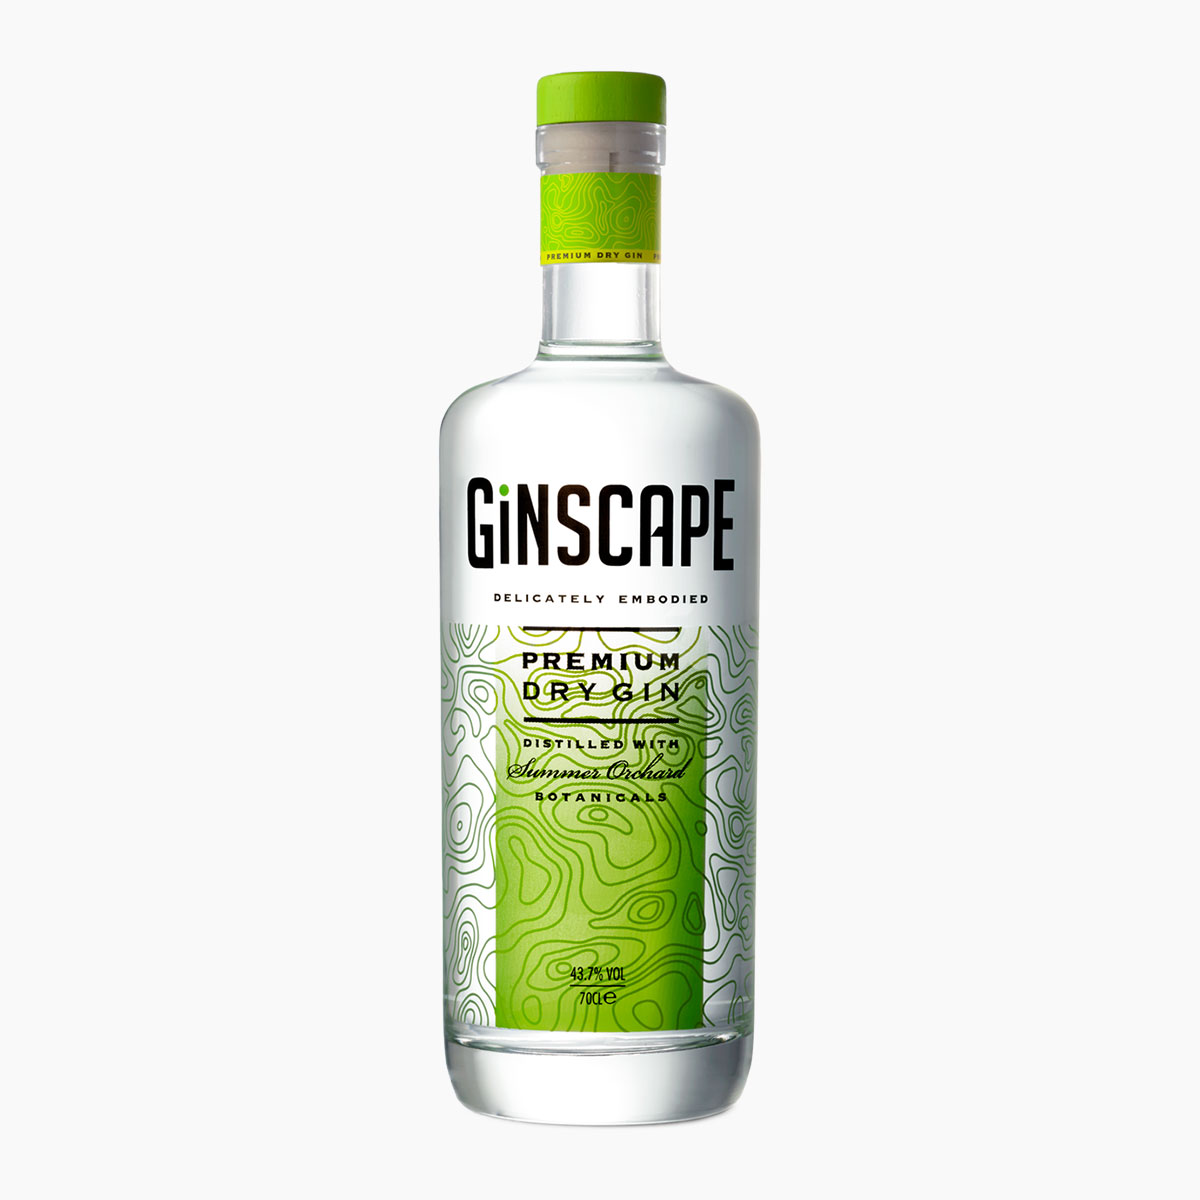 Ginscape Summer Orchard Gin